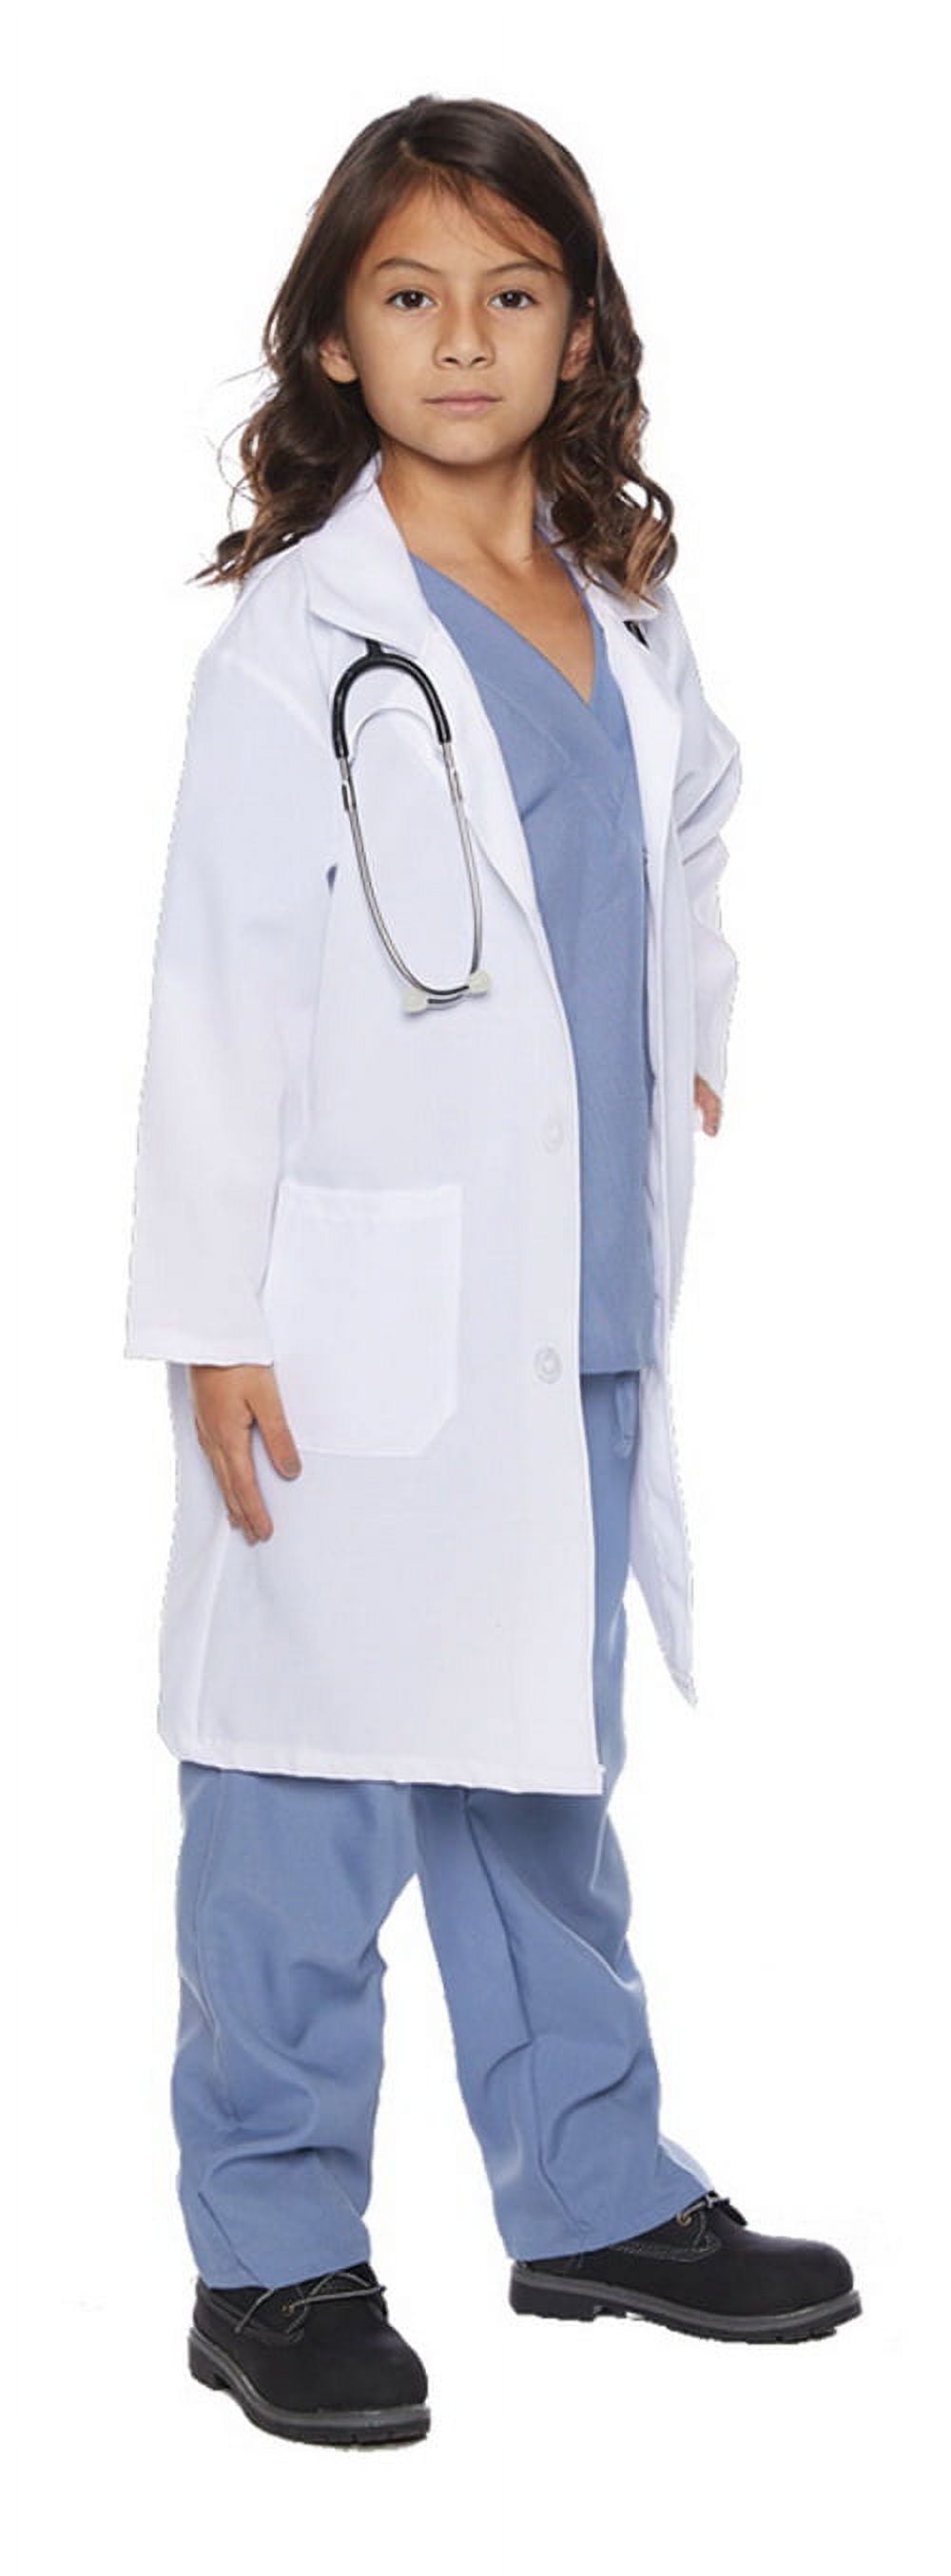 Doctor Scrubs With Lab Coat Child Halloween Costume